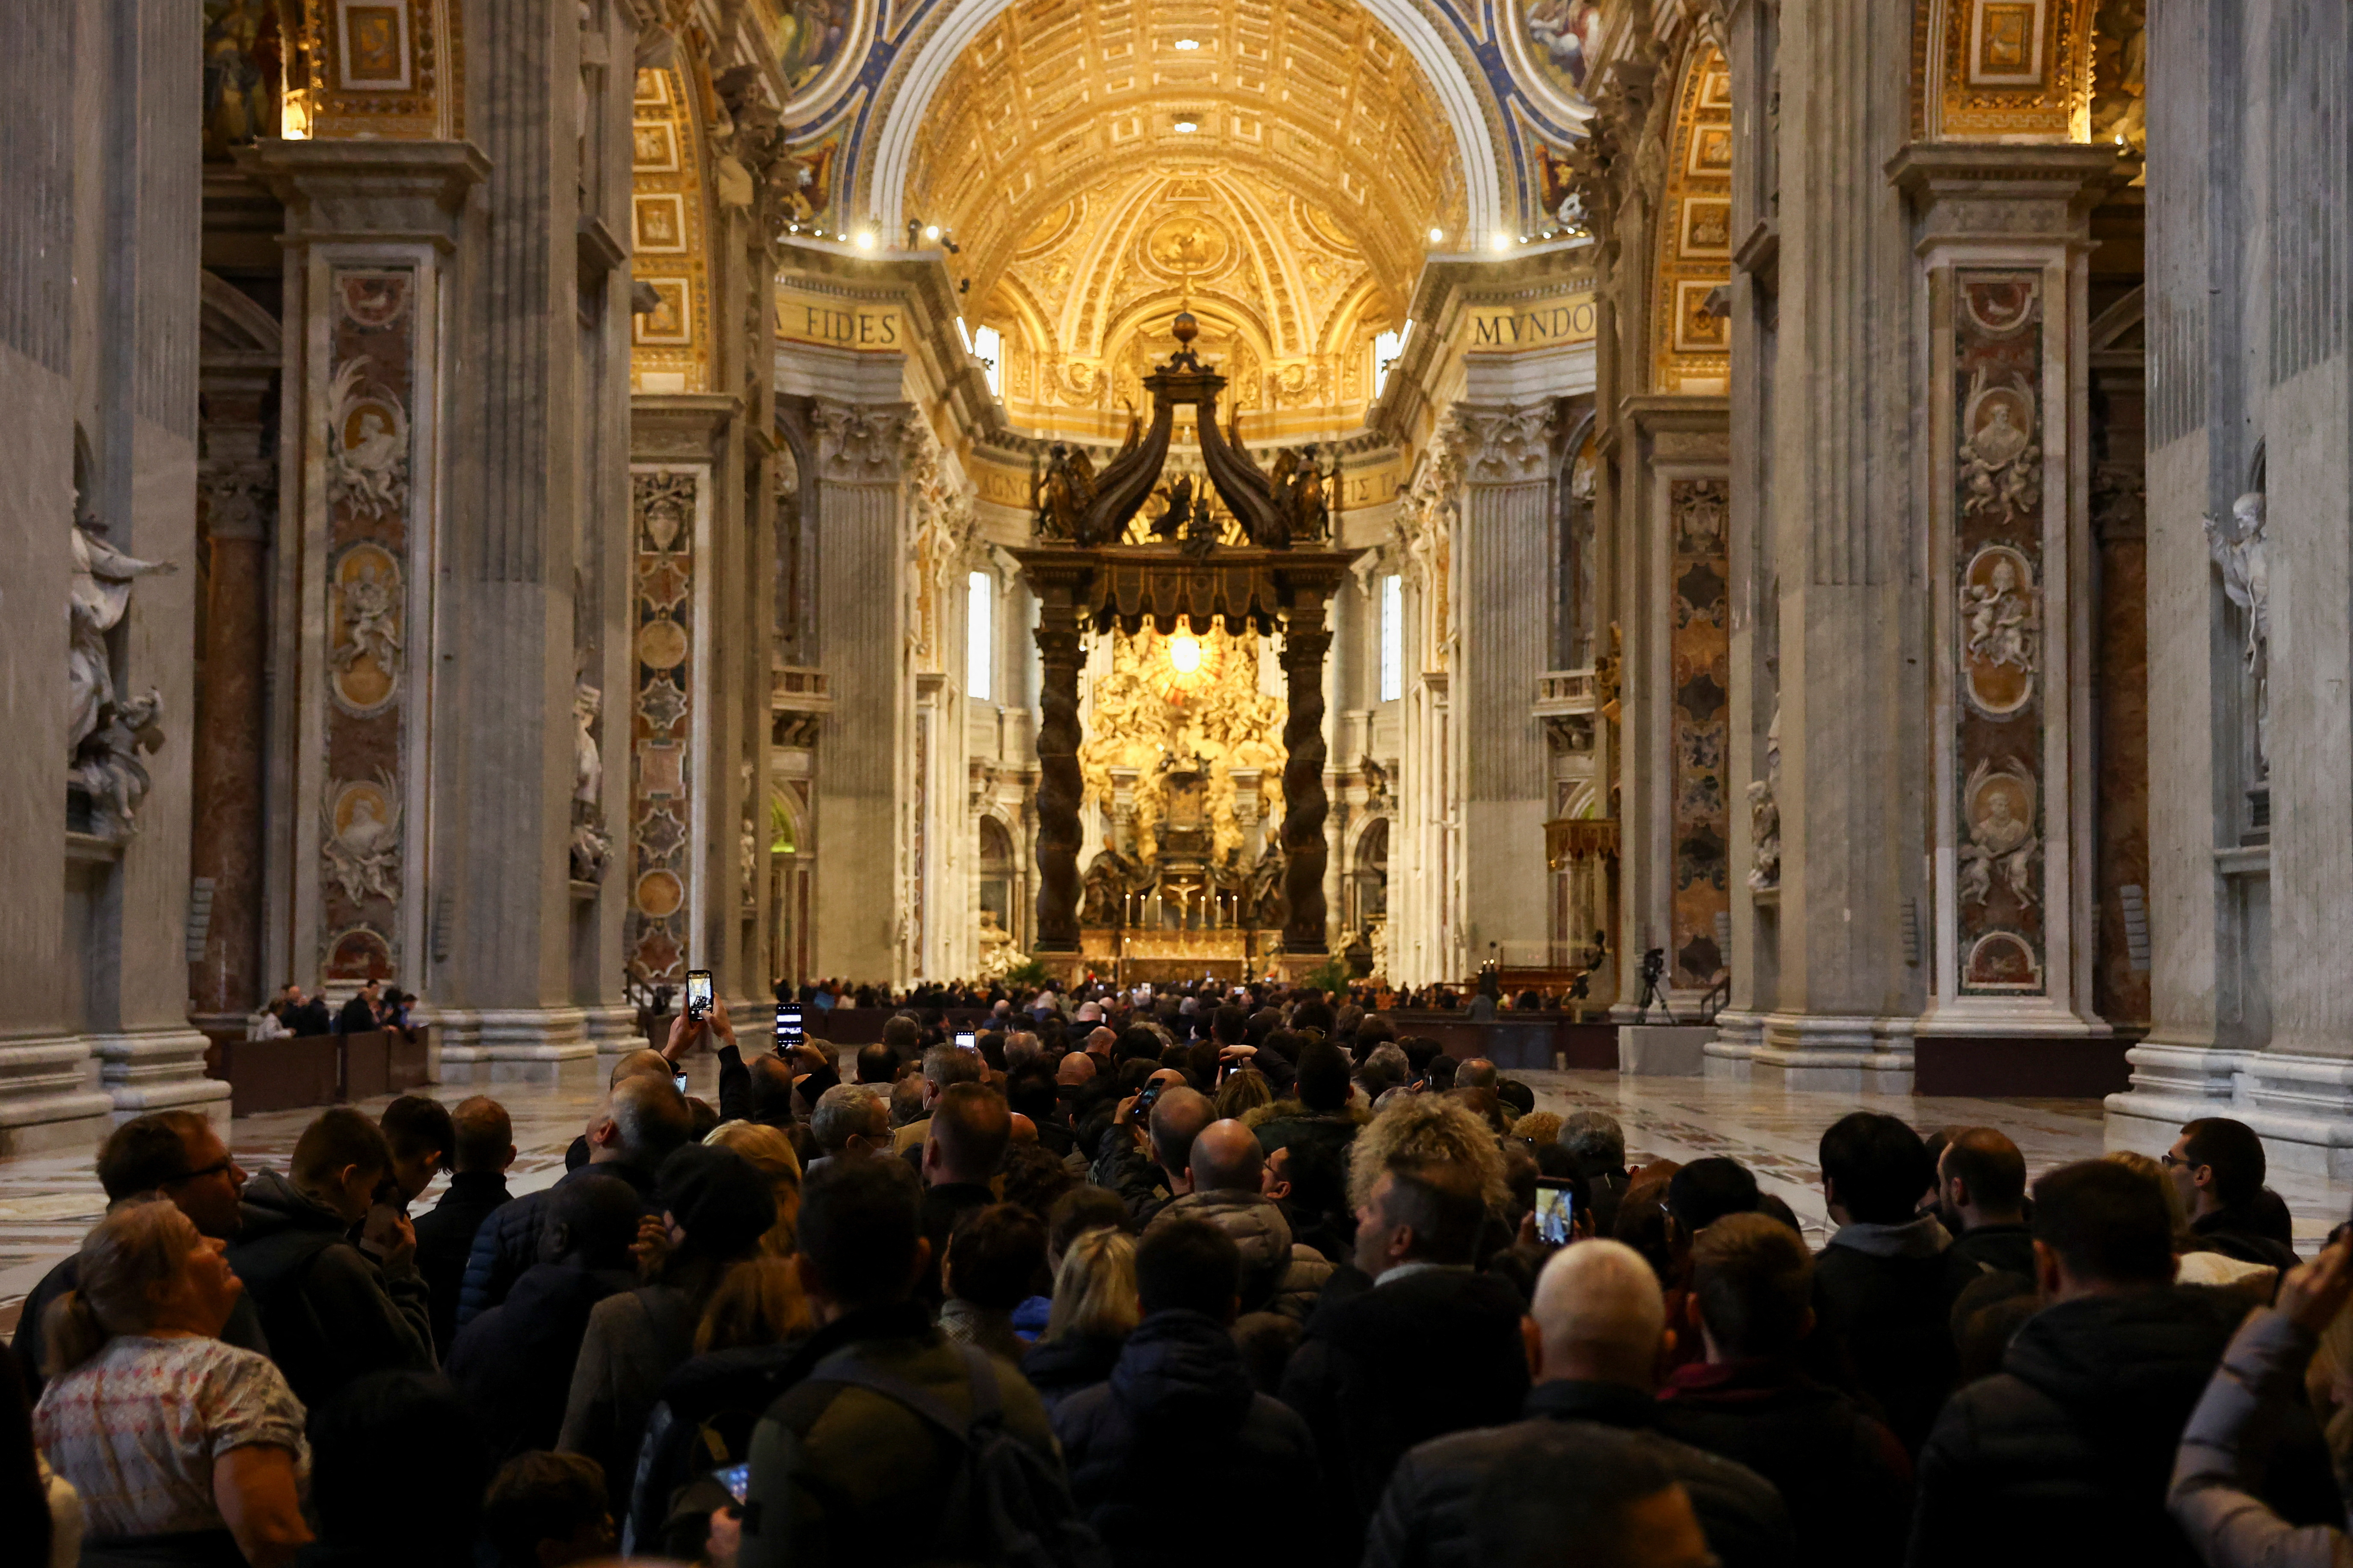 A faithful tribute to former Pope Benedict at St. Peter's Basilica in the Vatican